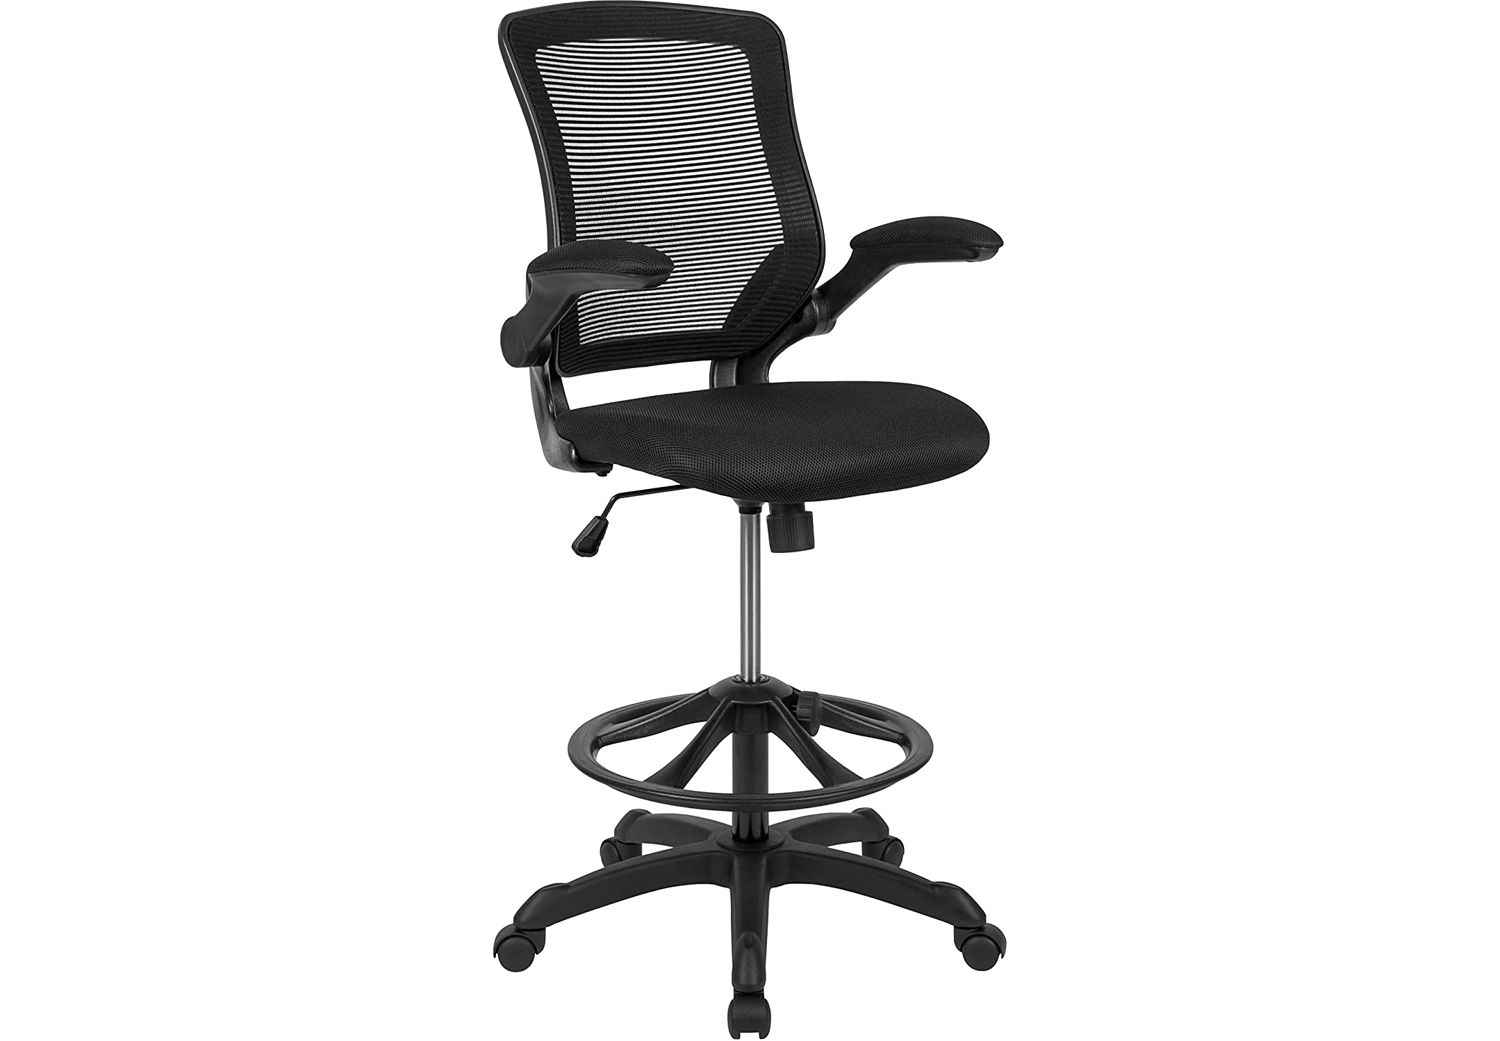 The NetDigz Editors rate the Flash Furniture Mesh as the Best Budget Drafting Chair.